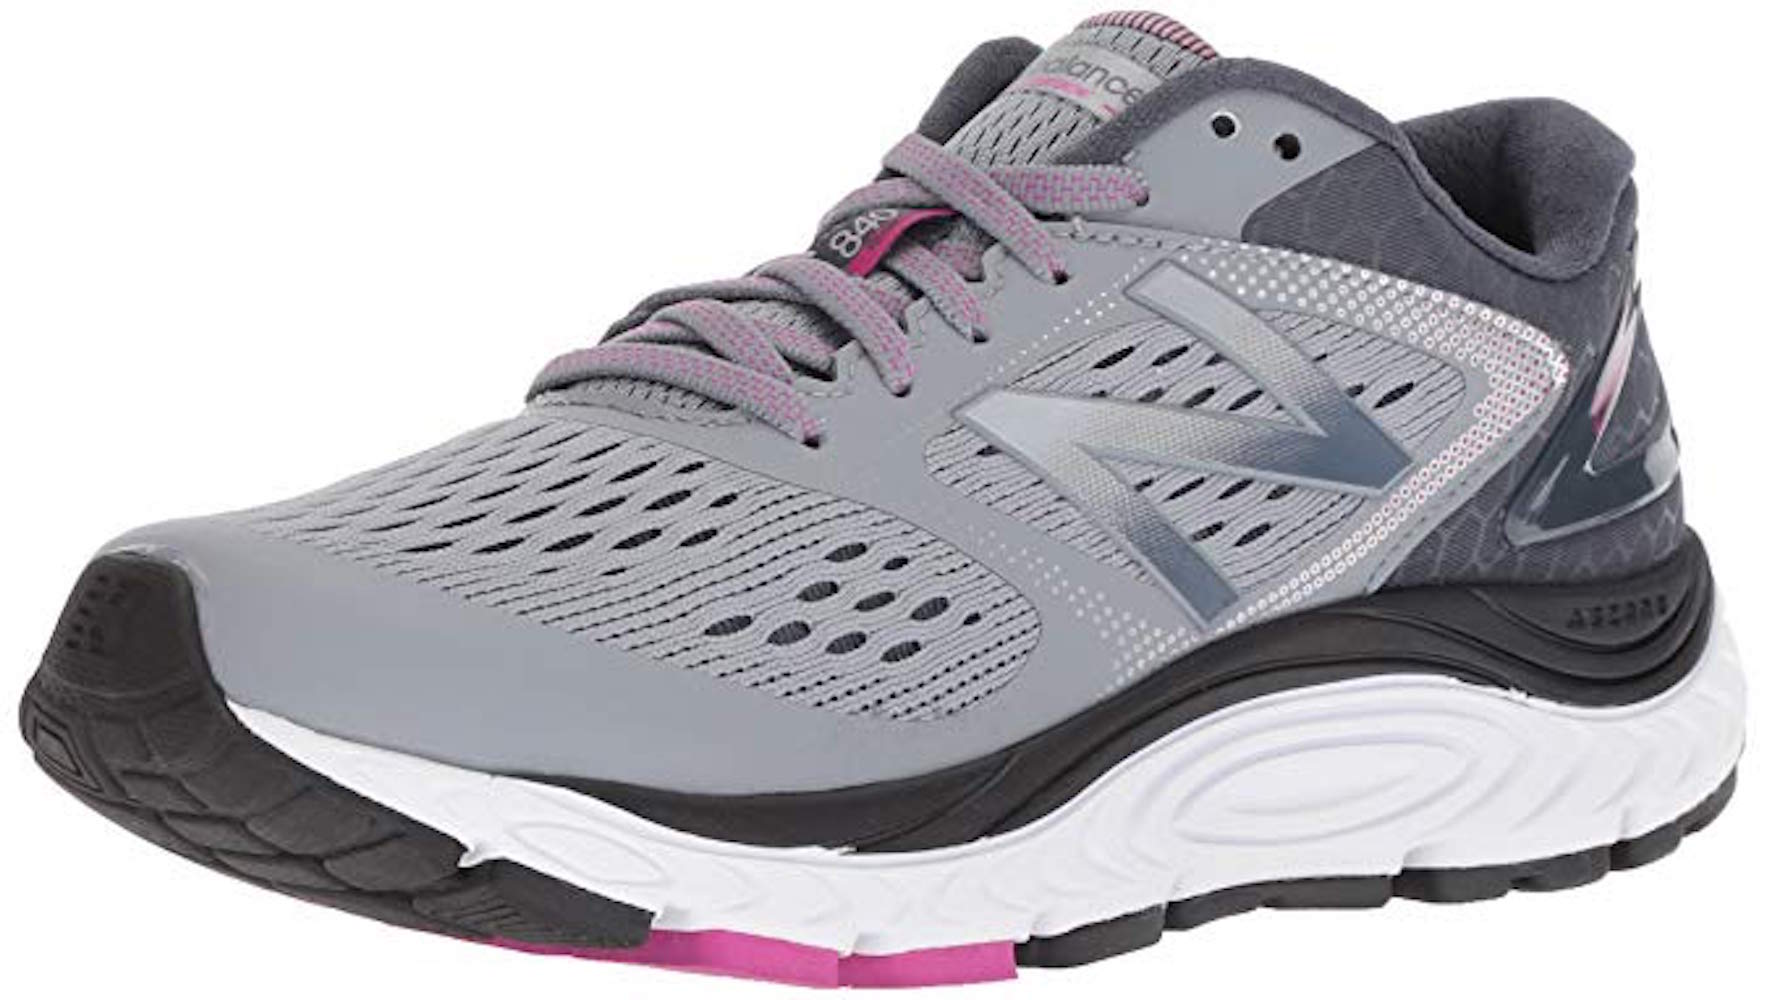 New Balance Women's Shoes W840GO4 Fabric Low Top Lace Up, Grey/Pink ...